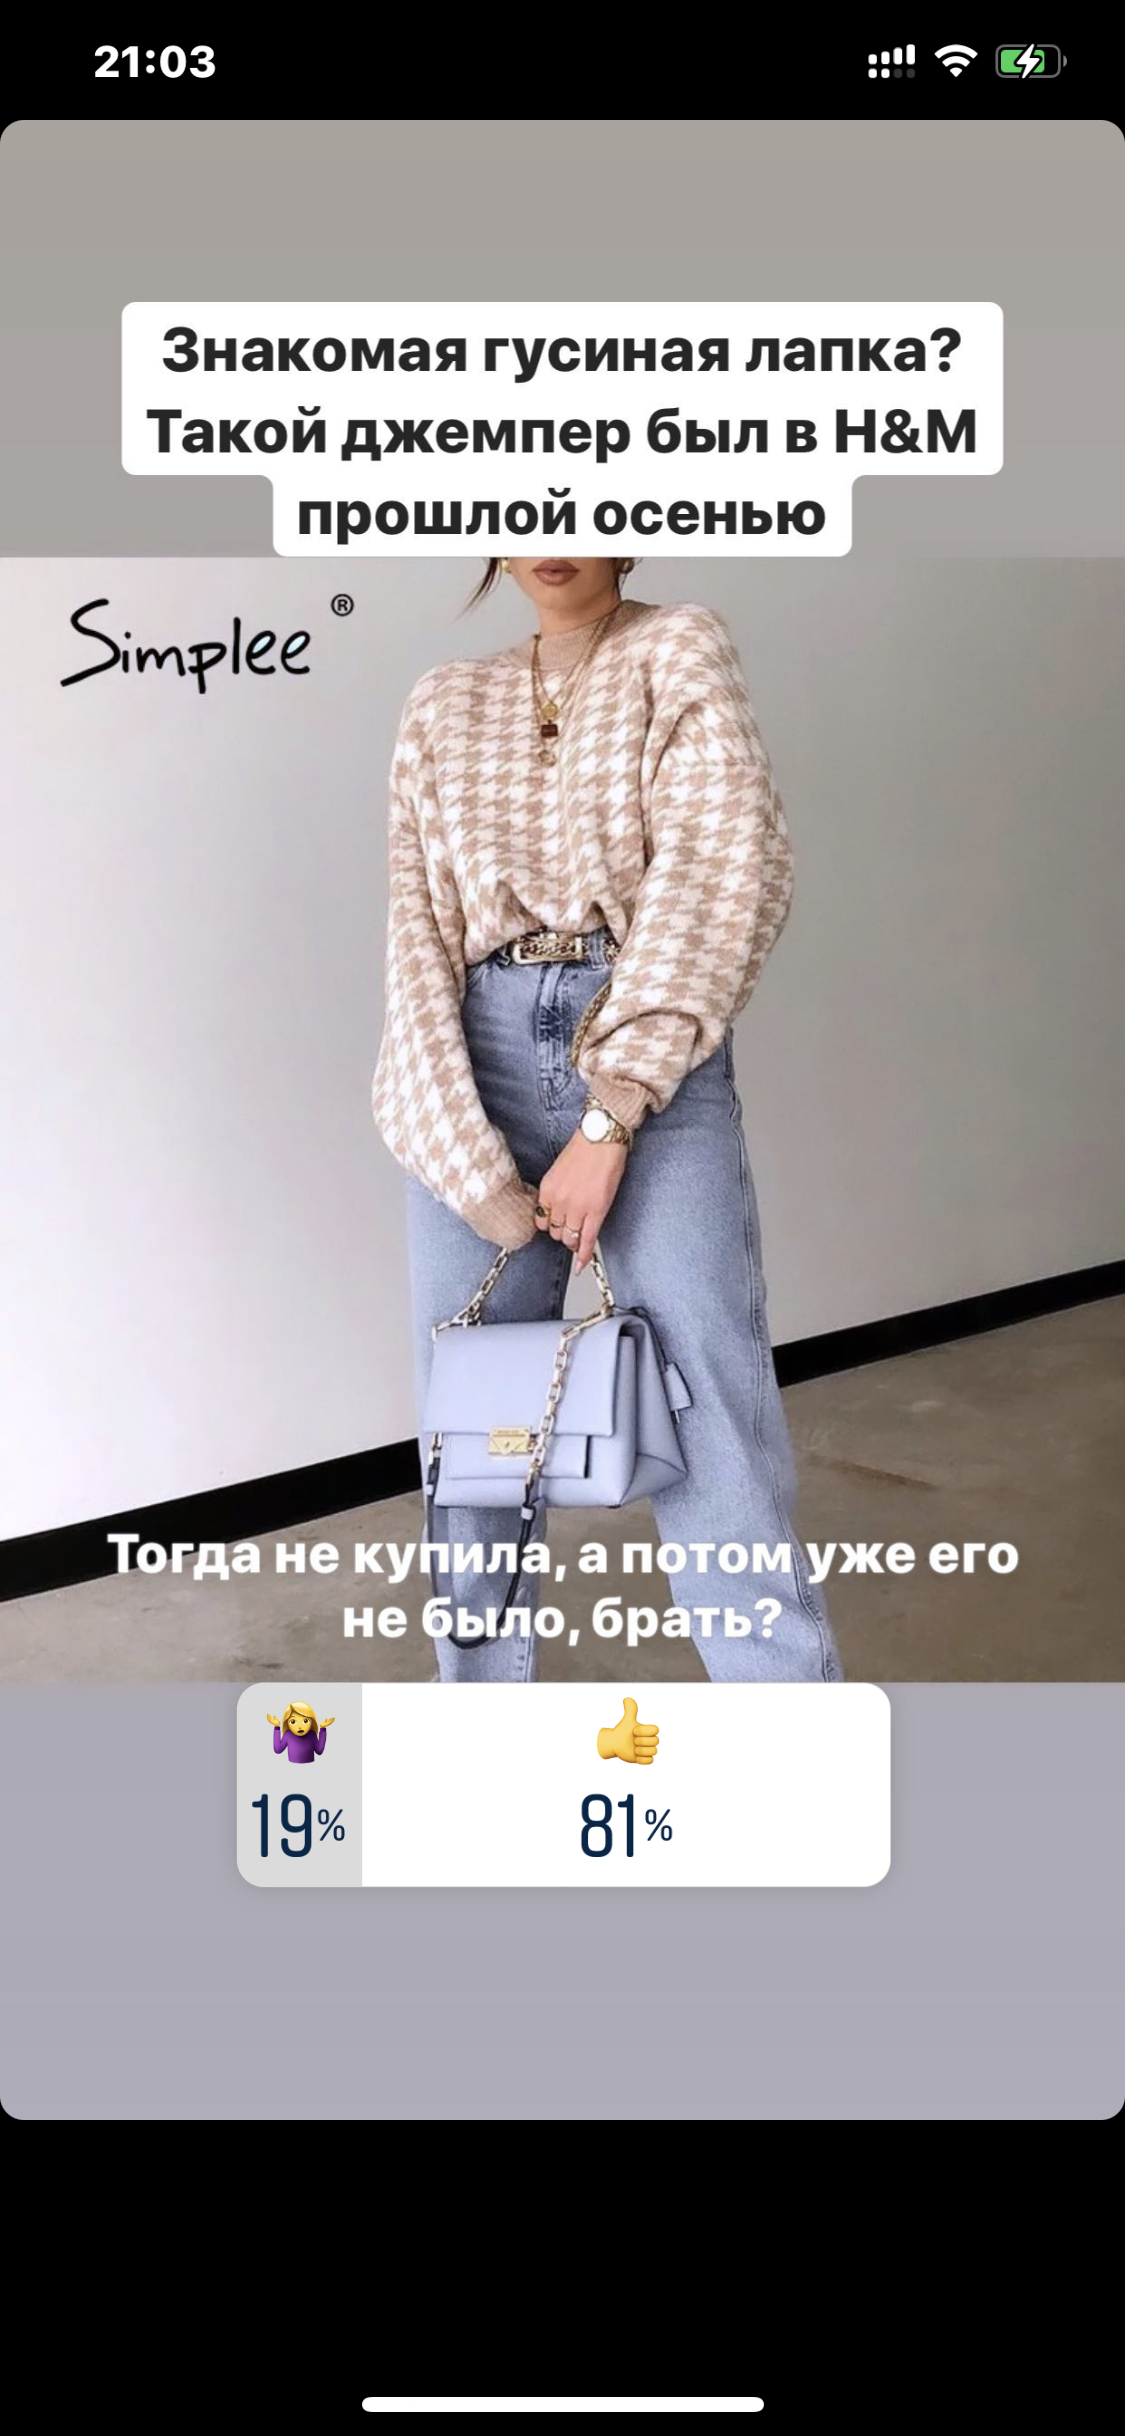 <p>Women&#39;s clothing and footwear in bed or calm colors, kezhl style, sizes according to European standards. Fashionable casual wear for youth. The volume for the beginning is calculated in the region of $ 2500 to buy, and as needed.</p>

<p>&nbsp;</p>

<p>(translated from russian)</p>